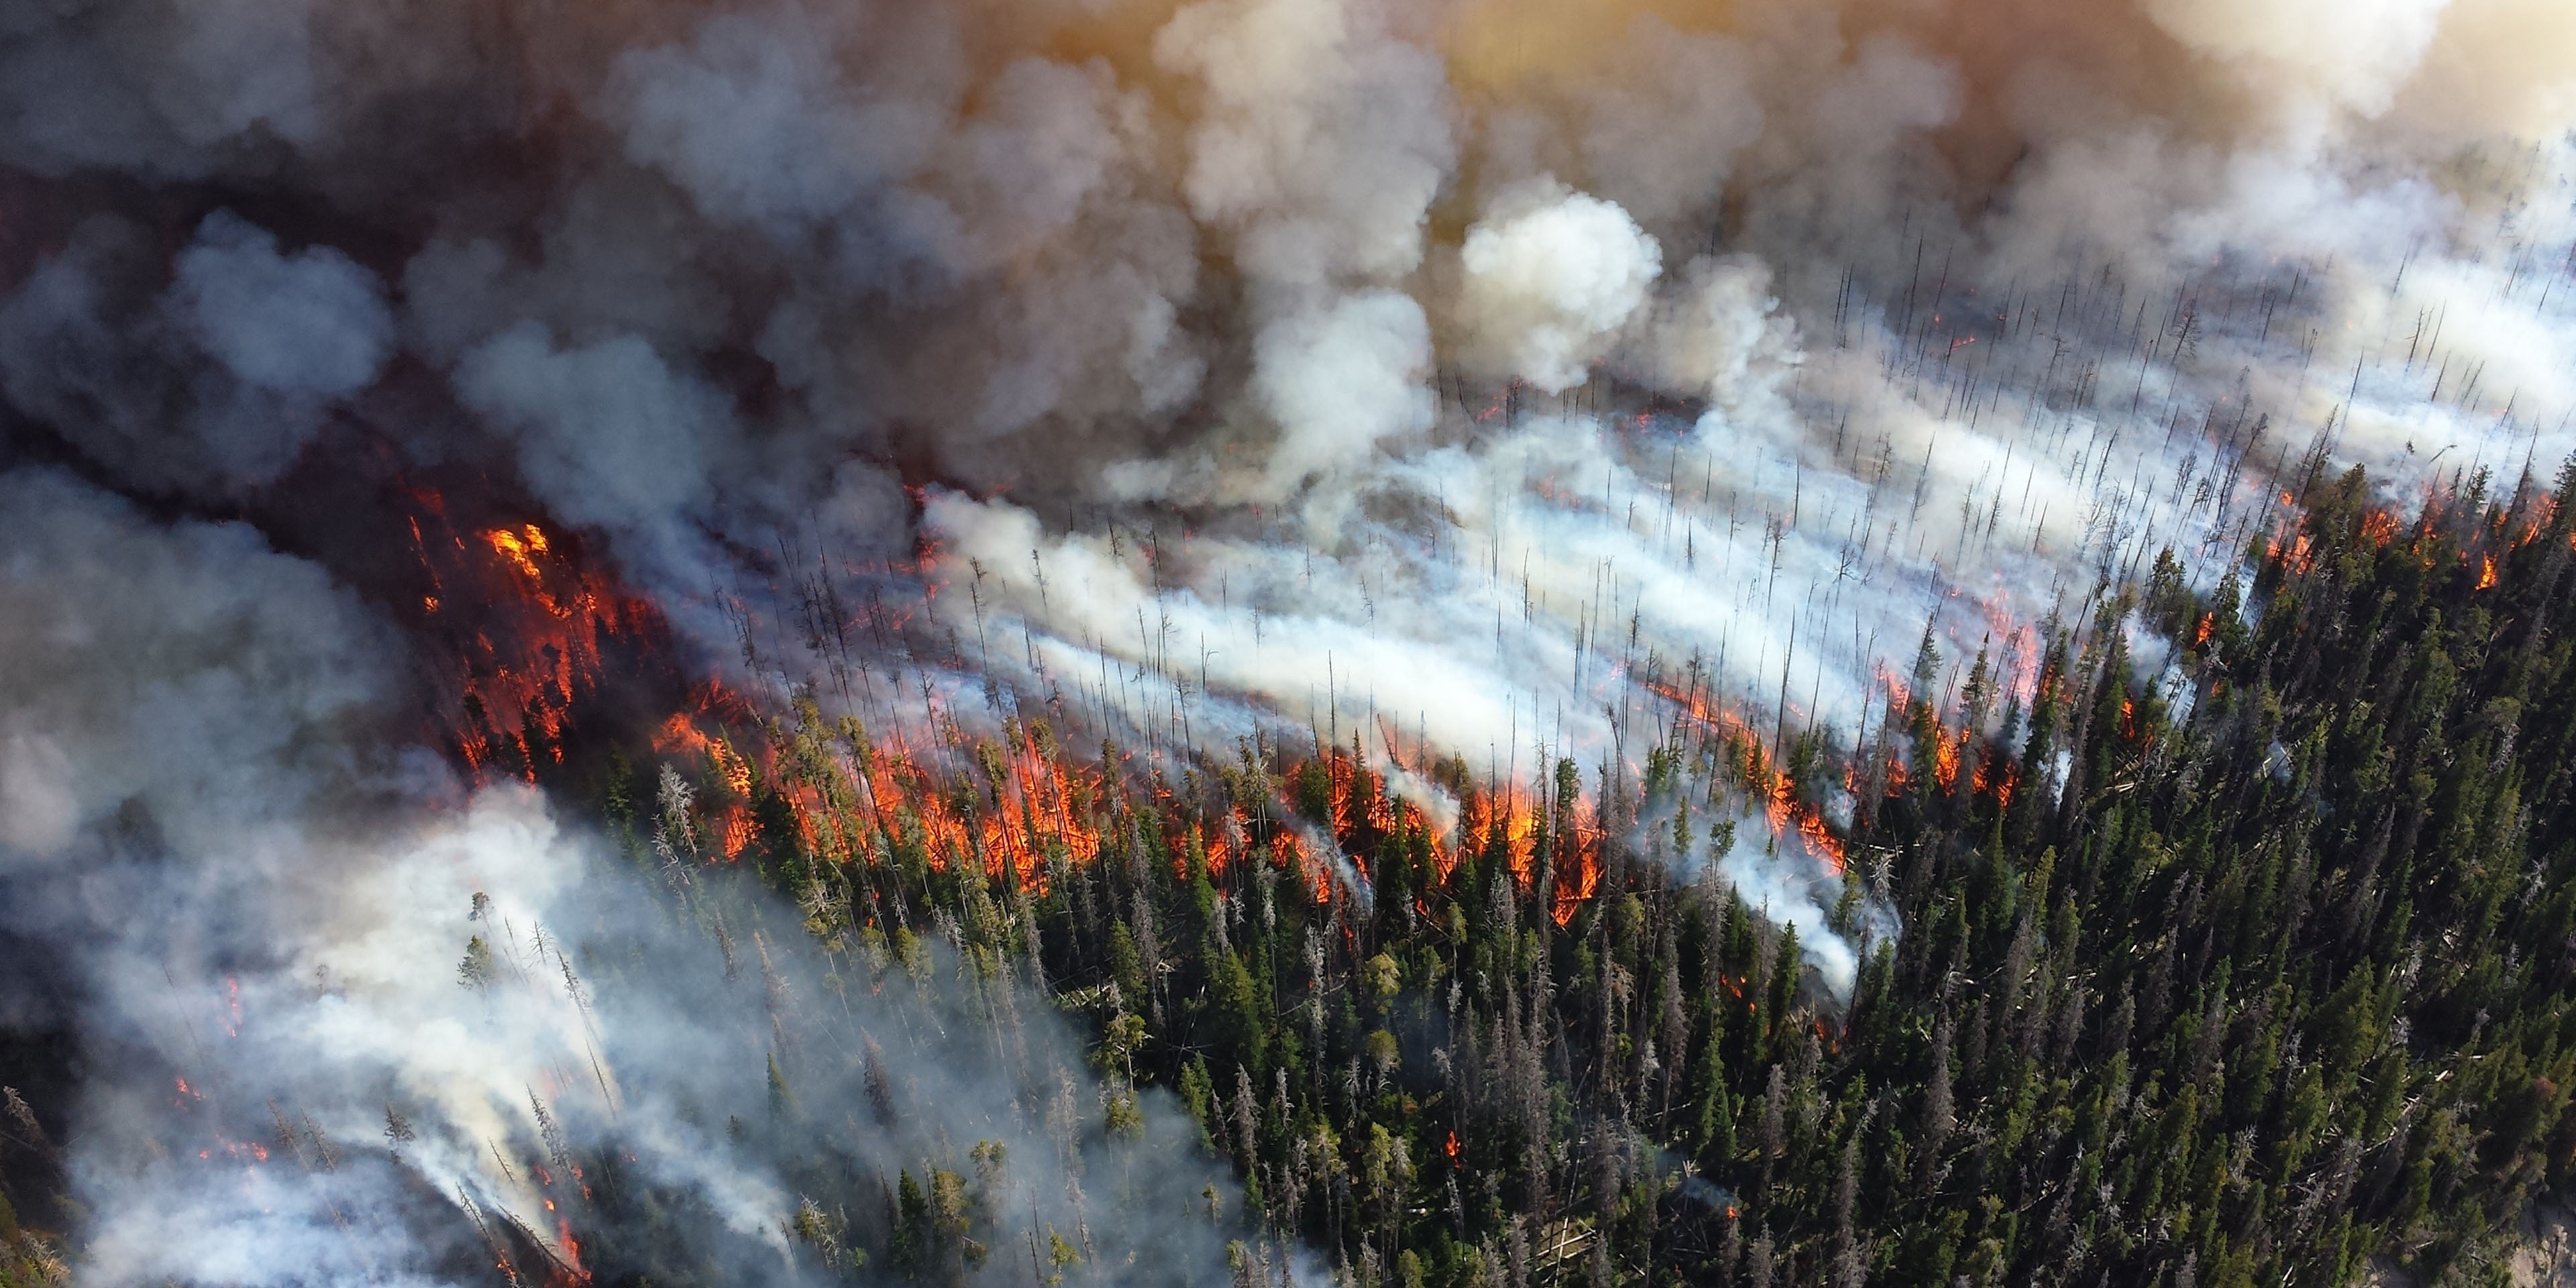 Aerial view of forest fire showing flaming trees and smoke-filled air.